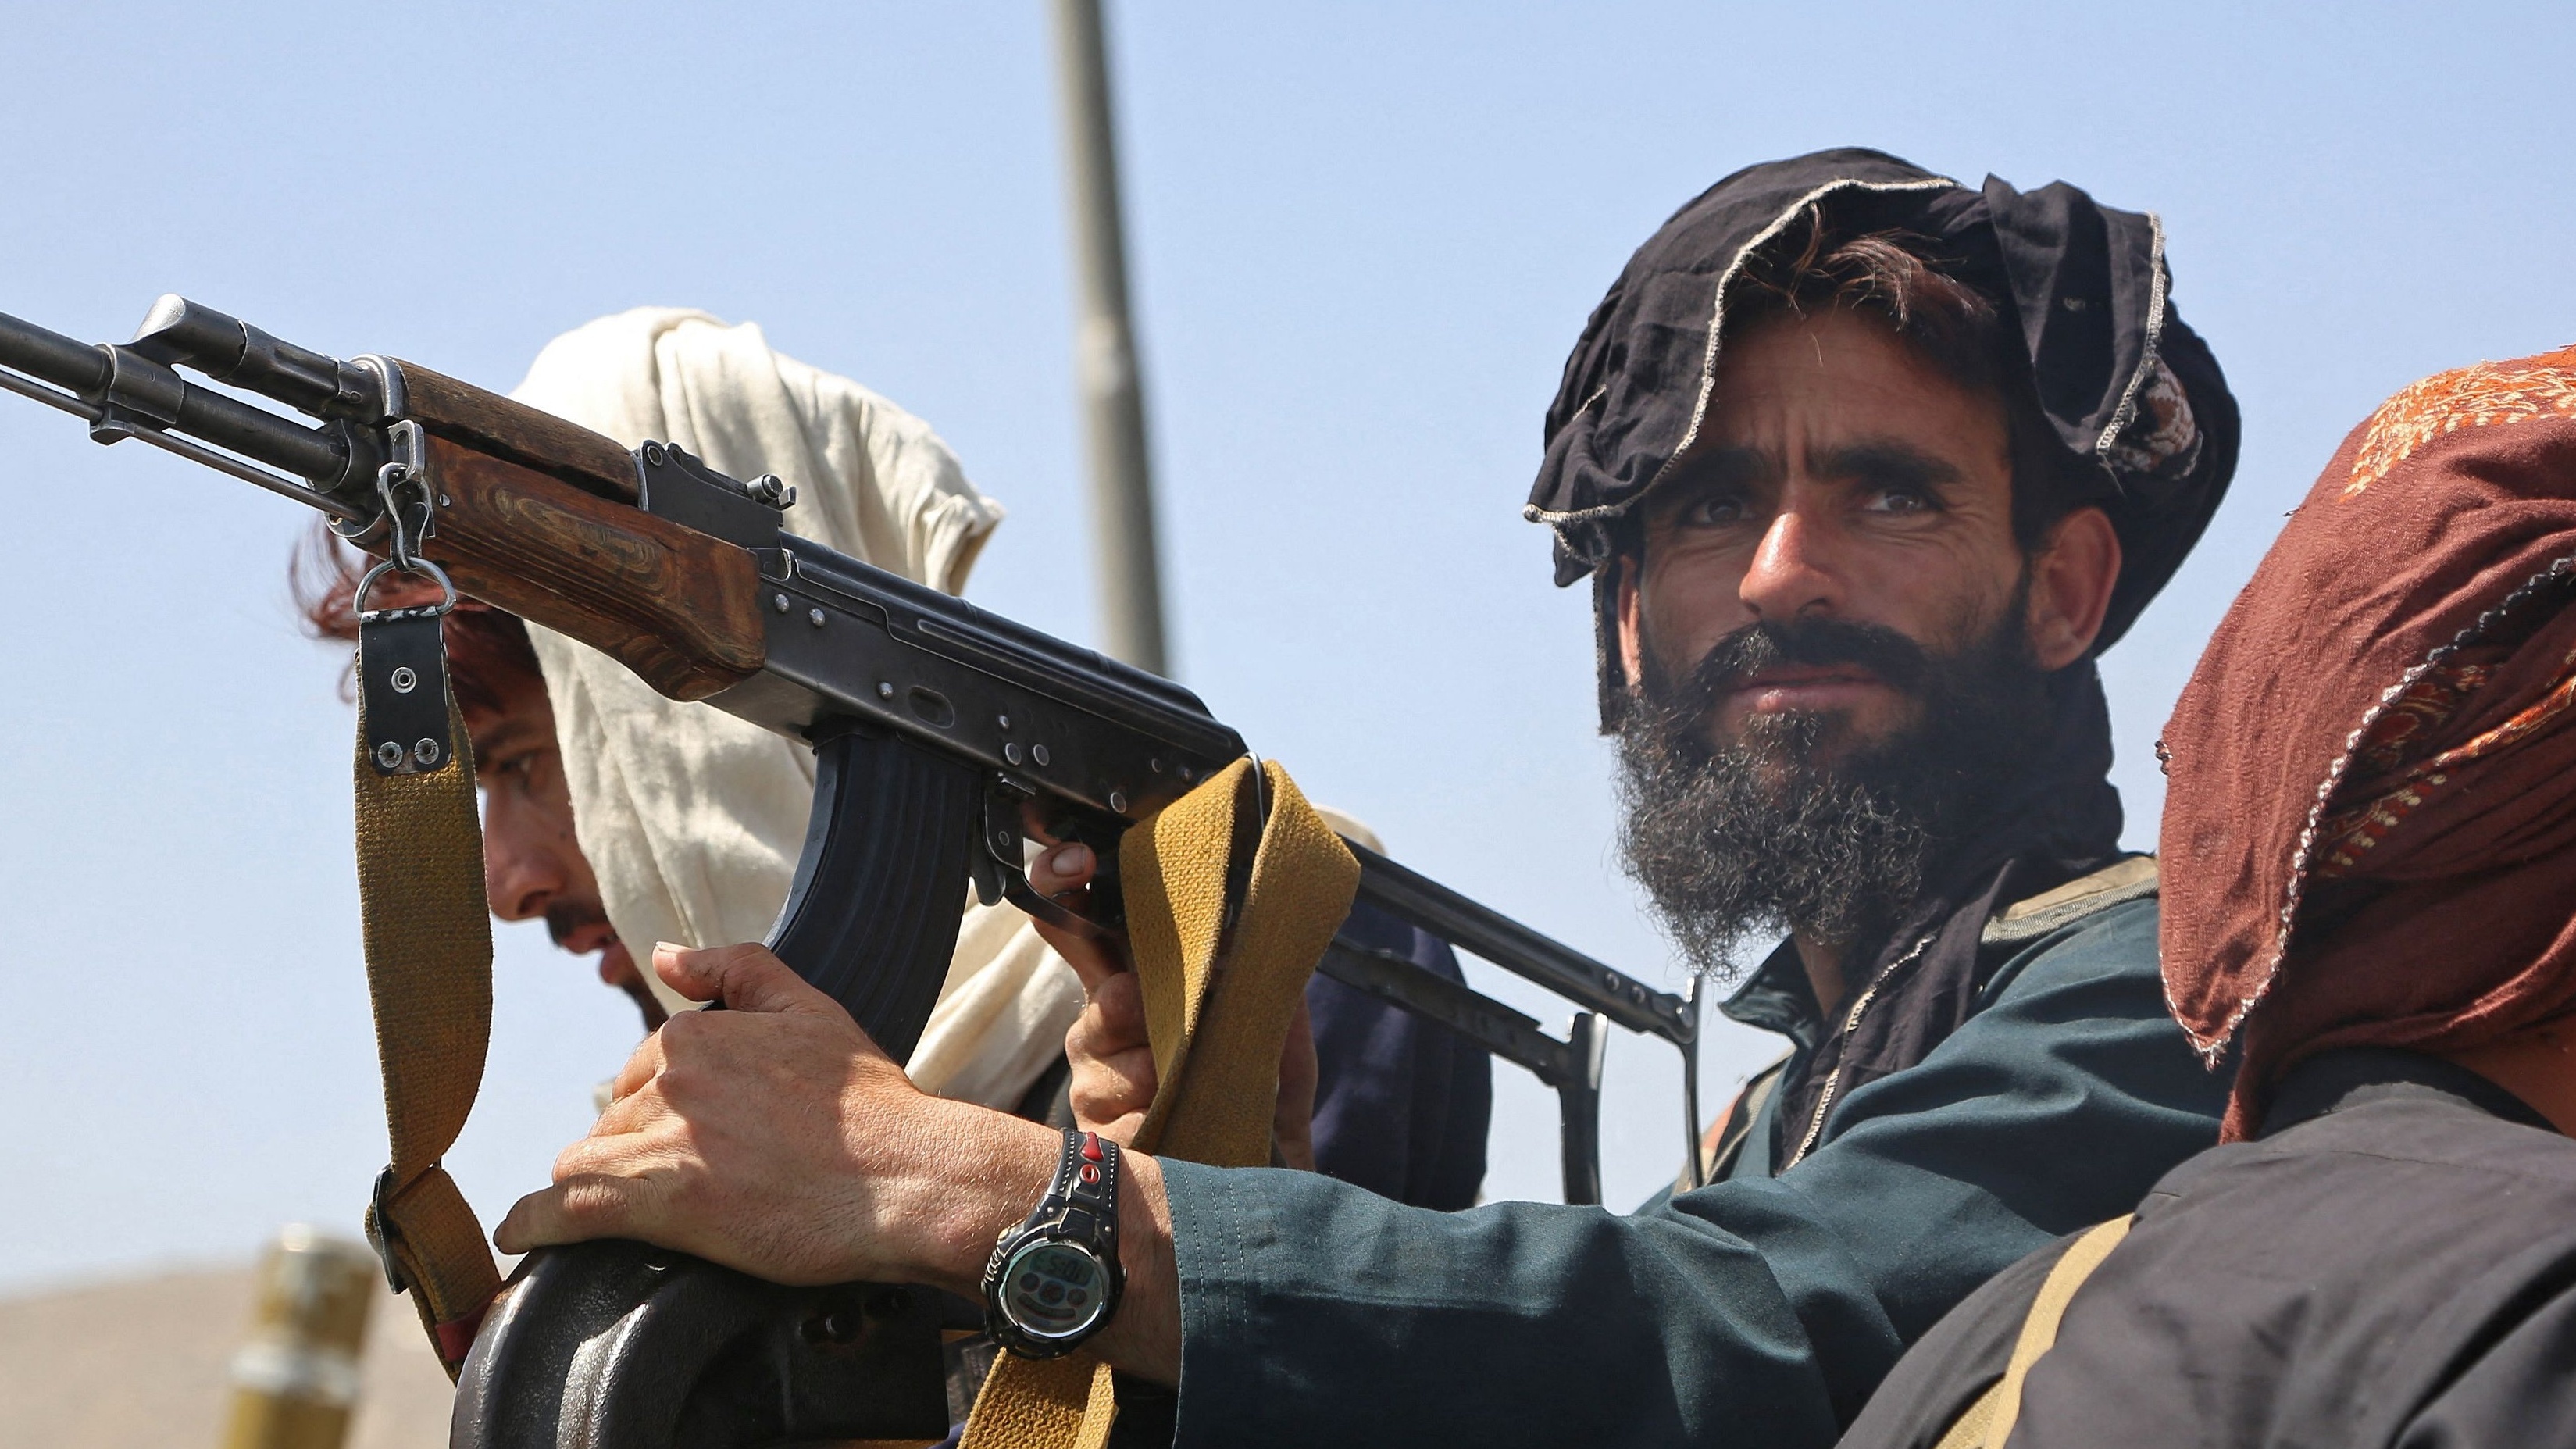 Taliban fighters enter Kabul on 16 August 2021